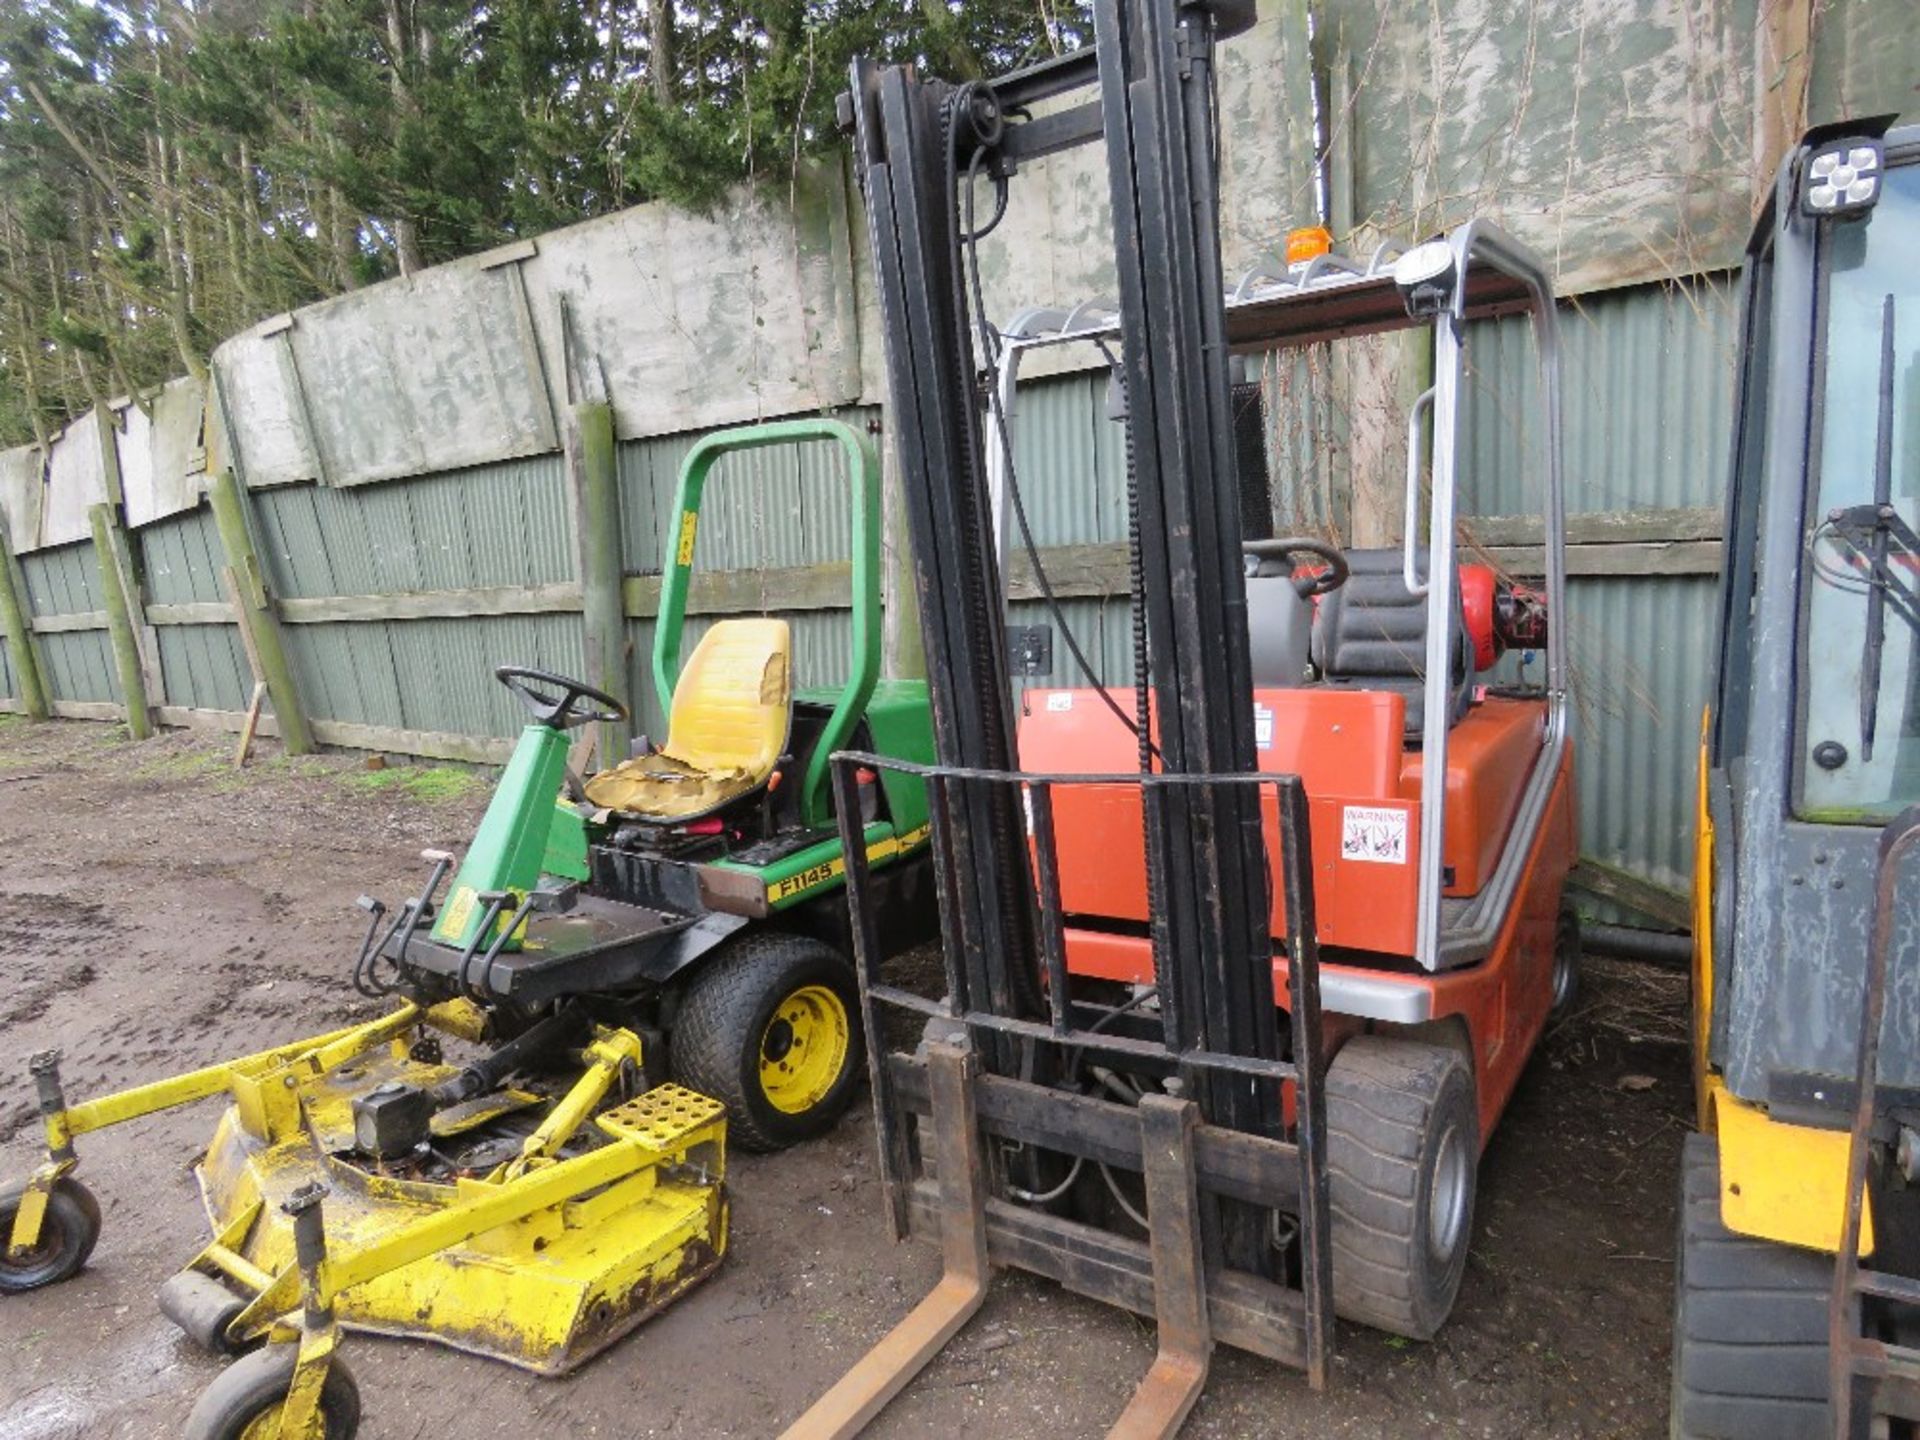 BT CARGO GAS POWERED FORKLIFT TRUCK, 3 TONNE RATED CAPACITY APPROX. 5154 REC HRS. SN:CE289098. - Image 4 of 14